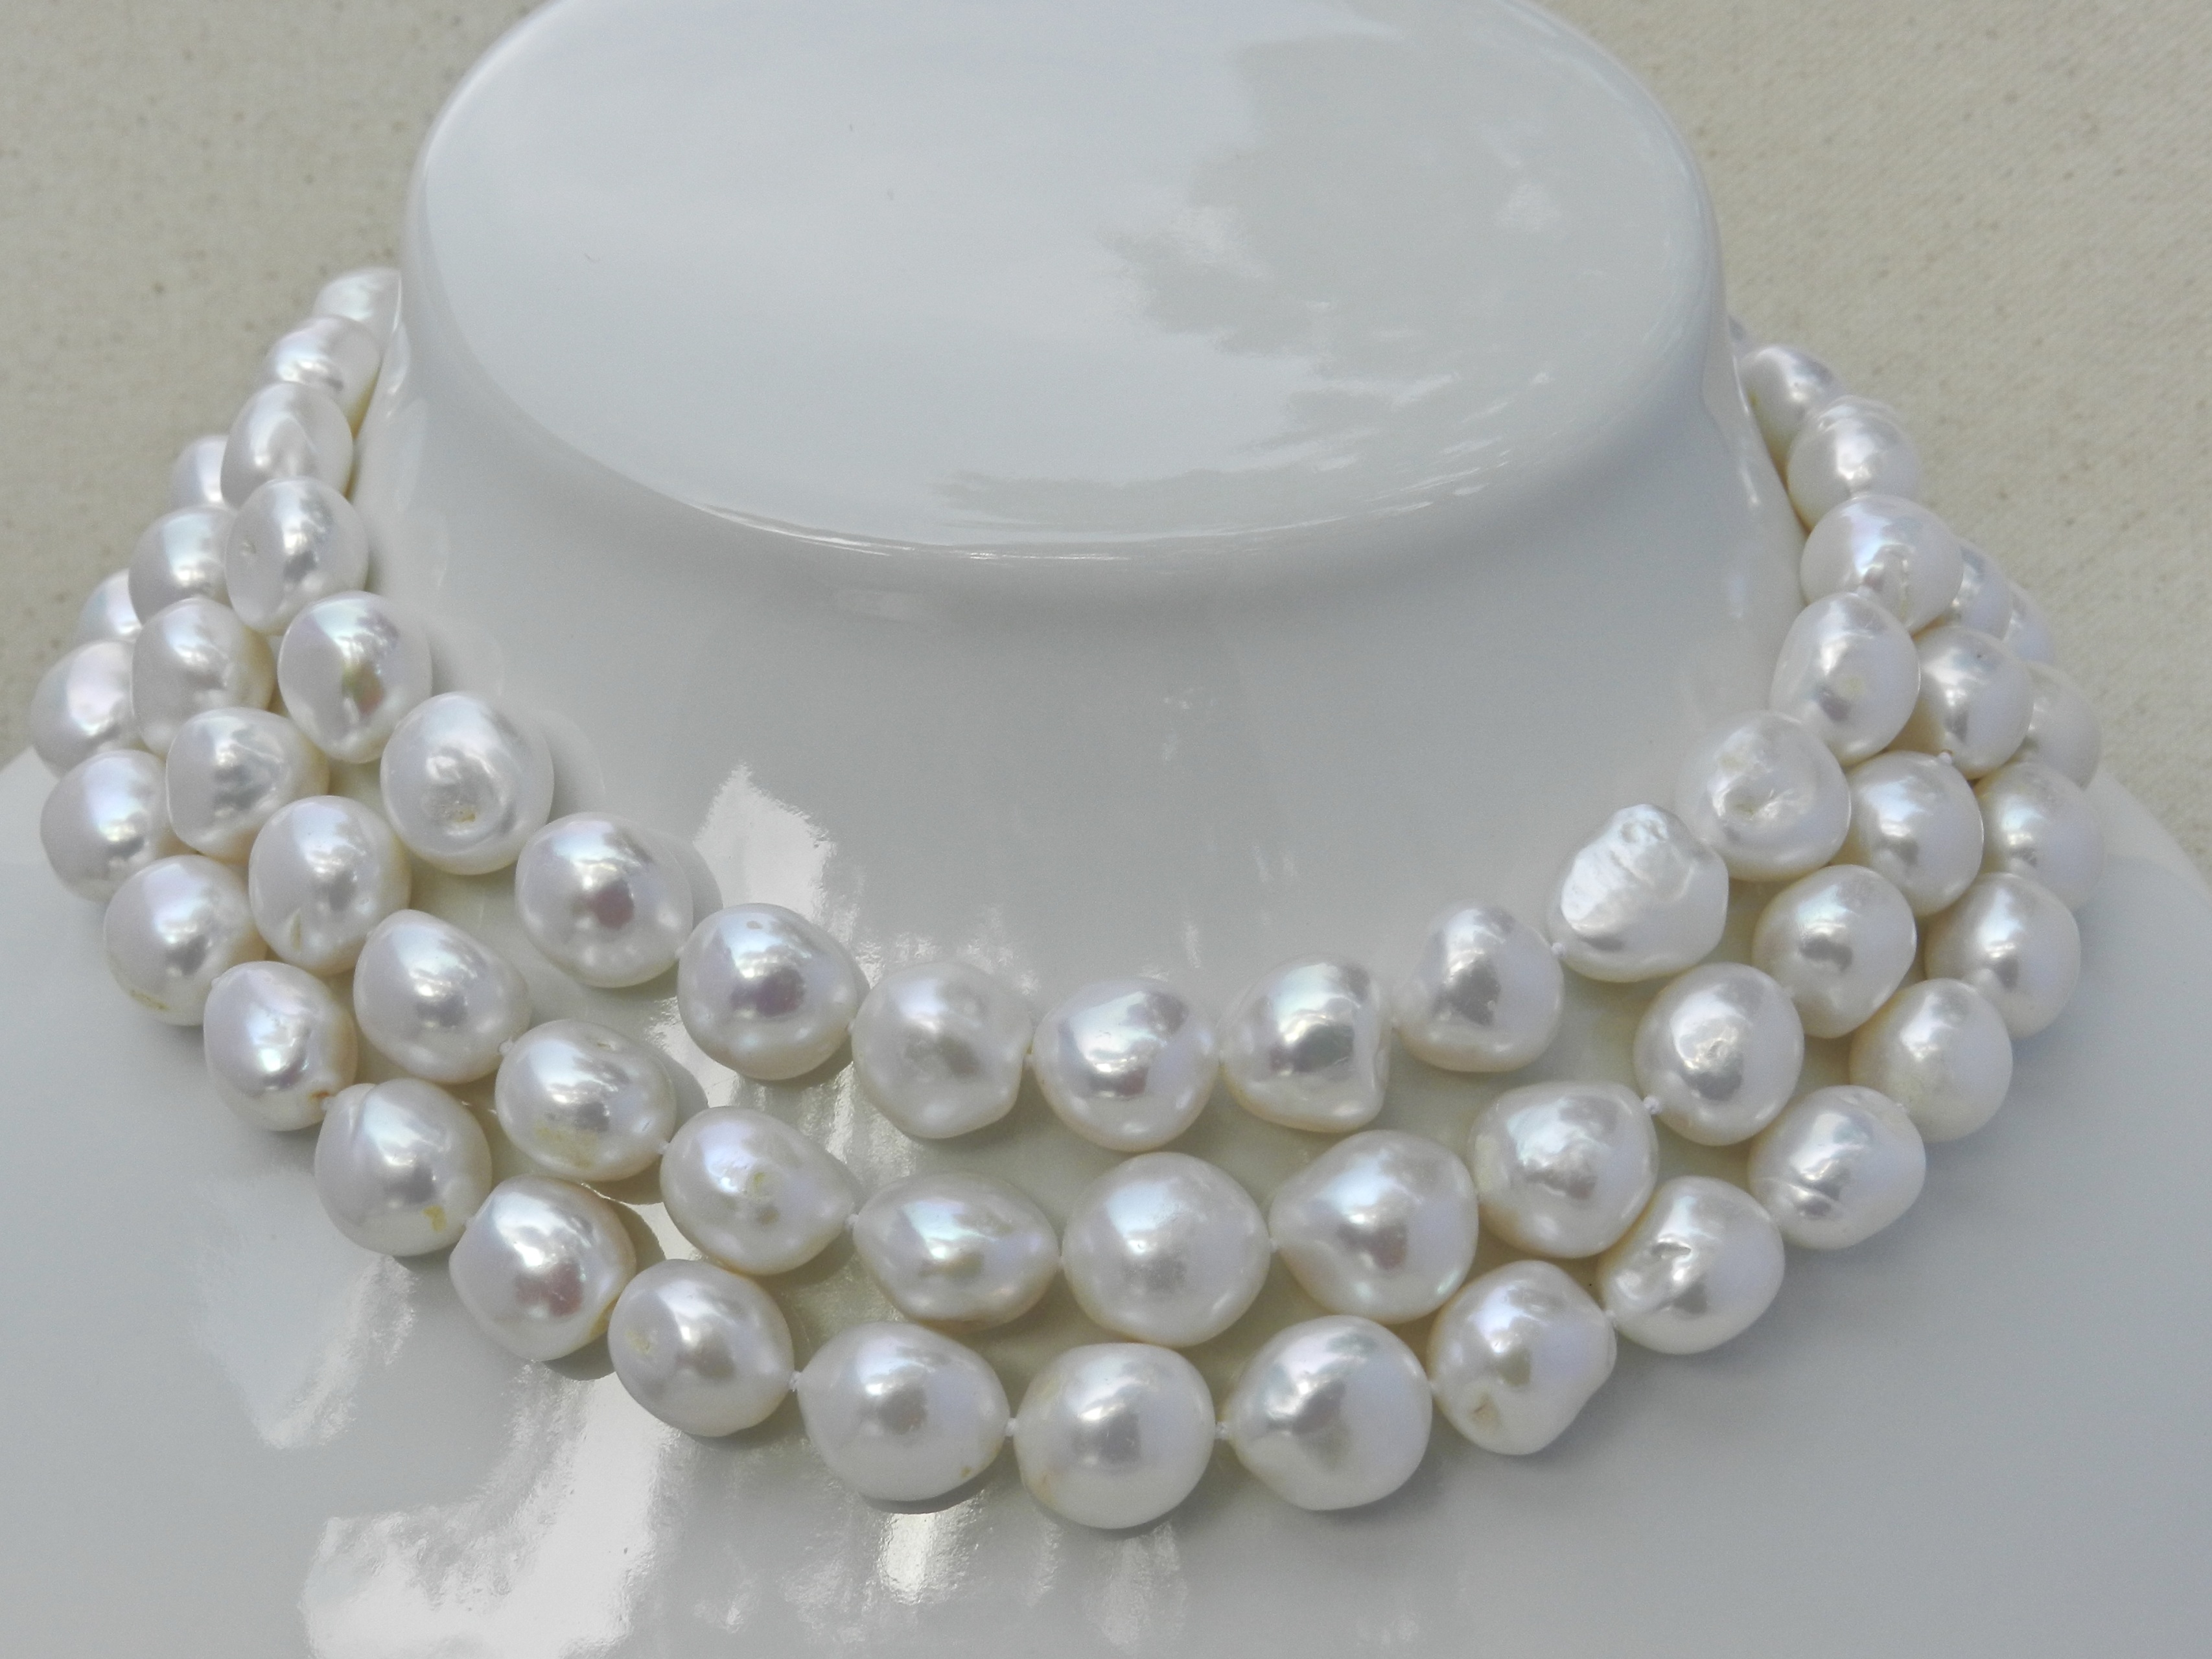 Pearls/Rope Necklace – Thryfty